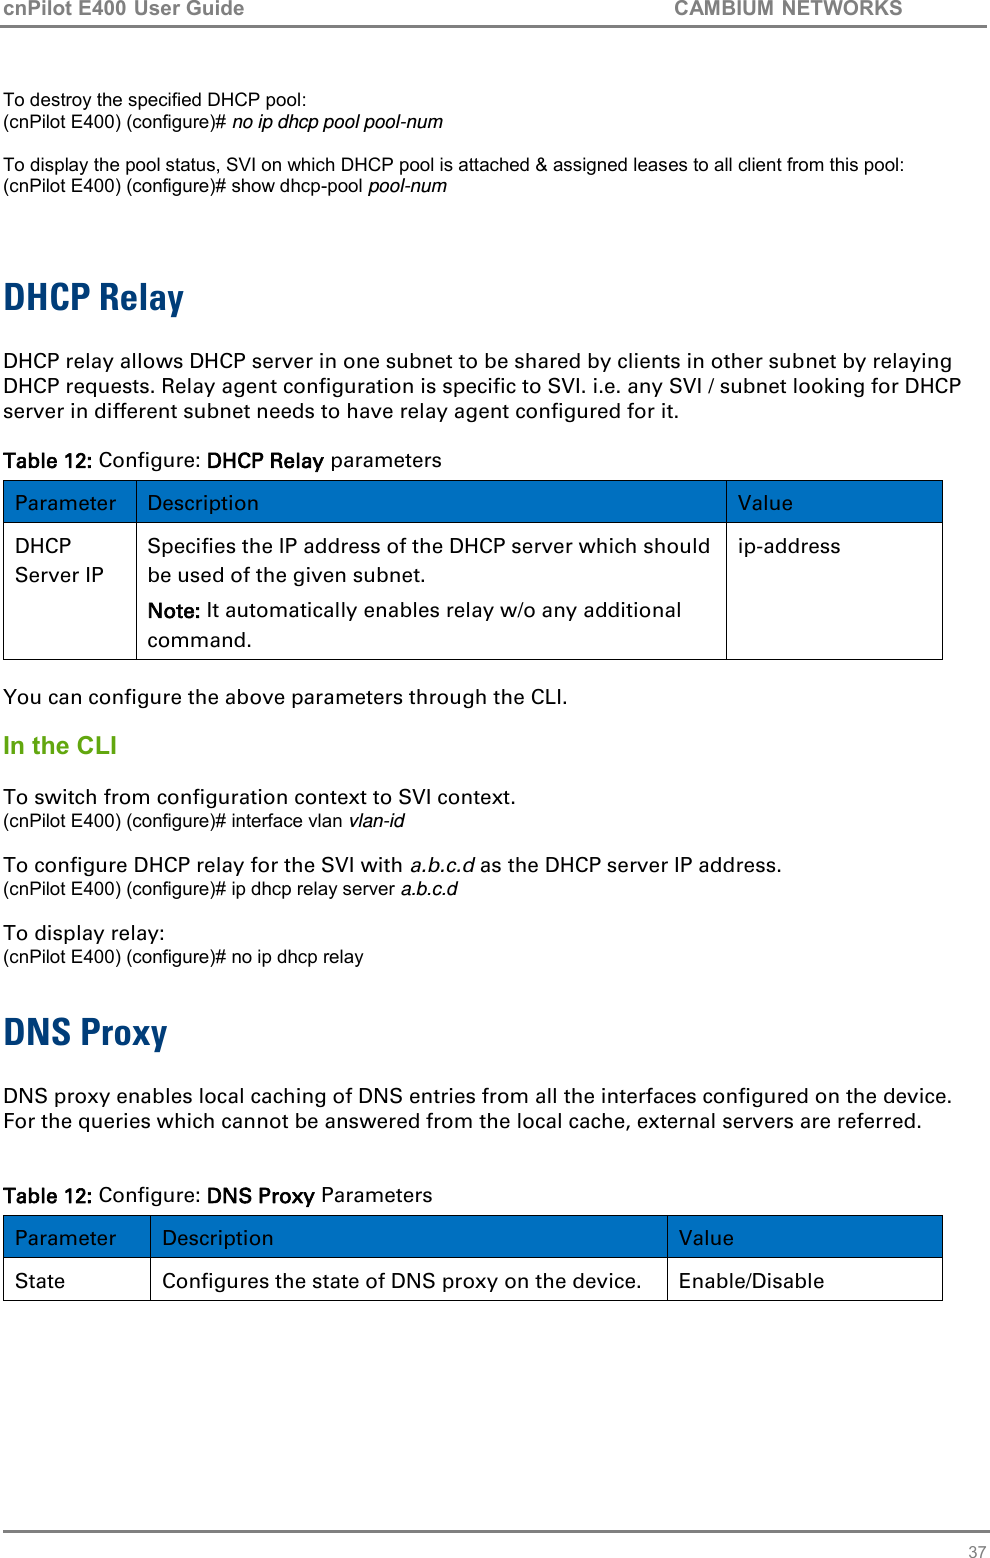 cnPilot E400 User Guide           CAMBIUM NETWORKS   37  To destroy the specified DHCP pool: (cnPilot E400) (configure)# no ip dhcp pool pool-num  To display the pool status, SVI on which DHCP pool is attached &amp; assigned leases to all client from this pool: (cnPilot E400) (configure)# show dhcp-pool pool-num   DHCP Relay  DHCP relay allows DHCP server in one subnet to be shared by clients in other subnet by relaying DHCP requests. Relay agent configuration is specific to SVI. i.e. any SVI / subnet looking for DHCP server in different subnet needs to have relay agent configured for it.  Table 12: Configure: DHCP Relay parameters Parameter Description Value DHCP Server IP Specifies the IP address of the DHCP server which should be used of the given subnet.  Note: It automatically enables relay w/o any additional command.   ip-address    You can configure the above parameters through the CLI.  In the CLI  To switch from configuration context to SVI context. (cnPilot E400) (configure)# interface vlan vlan-id  To configure DHCP relay for the SVI with a.b.c.d as the DHCP server IP address.  (cnPilot E400) (configure)# ip dhcp relay server a.b.c.d   To display relay: (cnPilot E400) (configure)# no ip dhcp relay  DNS Proxy  DNS proxy enables local caching of DNS entries from all the interfaces configured on the device. For the queries which cannot be answered from the local cache, external servers are referred.    Table 12: Configure: DNS Proxy Parameters Parameter Description Value State Configures the state of DNS proxy on the device.   Enable/Disable 